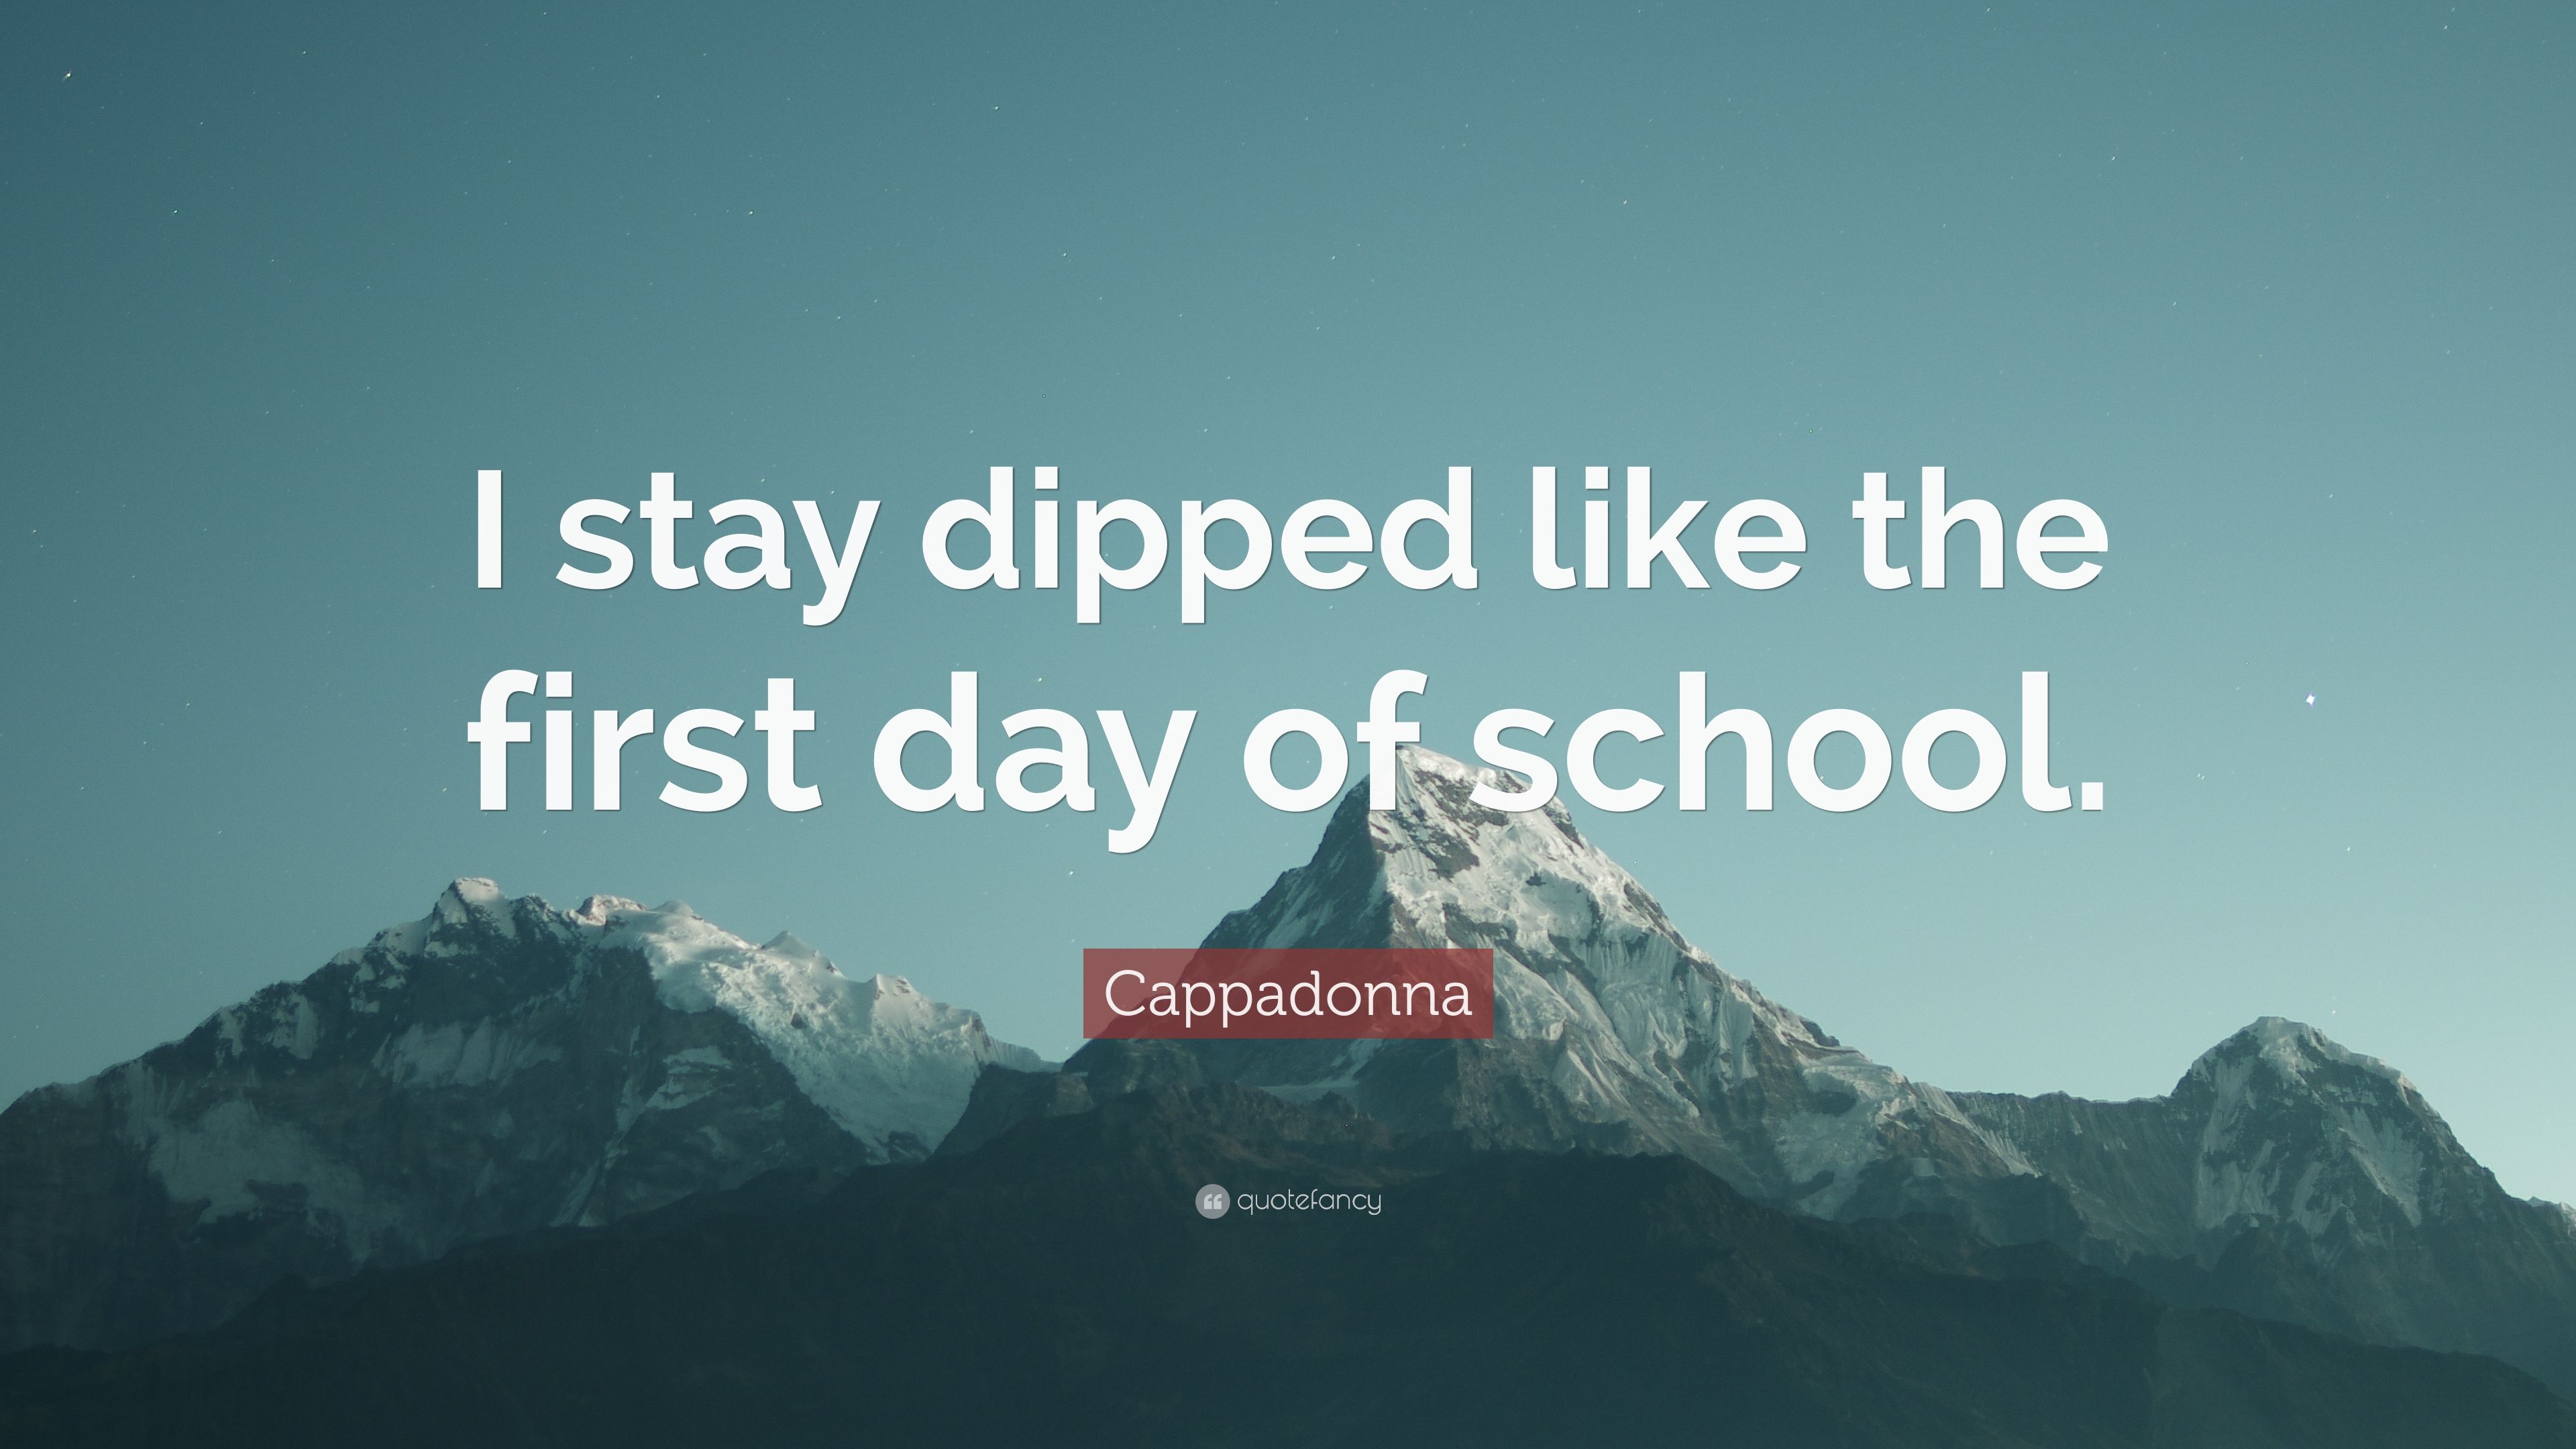 Cappadonna Quote: “I stay dipped like the first day of school.” 7